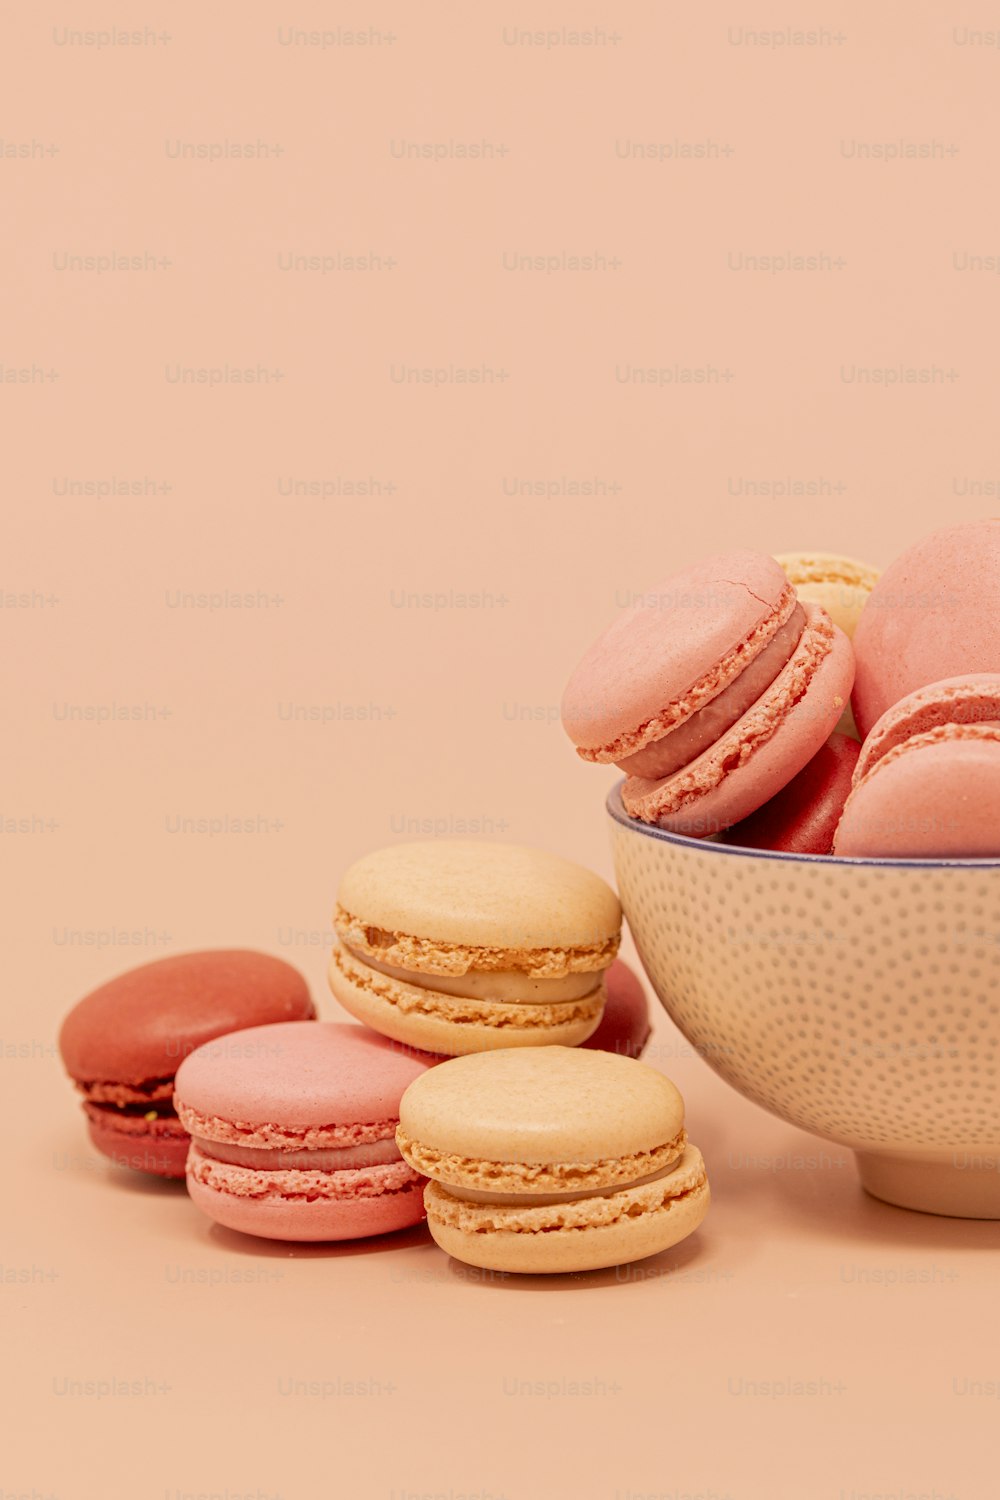 a bowl of macaroons next to a bowl of macaroons